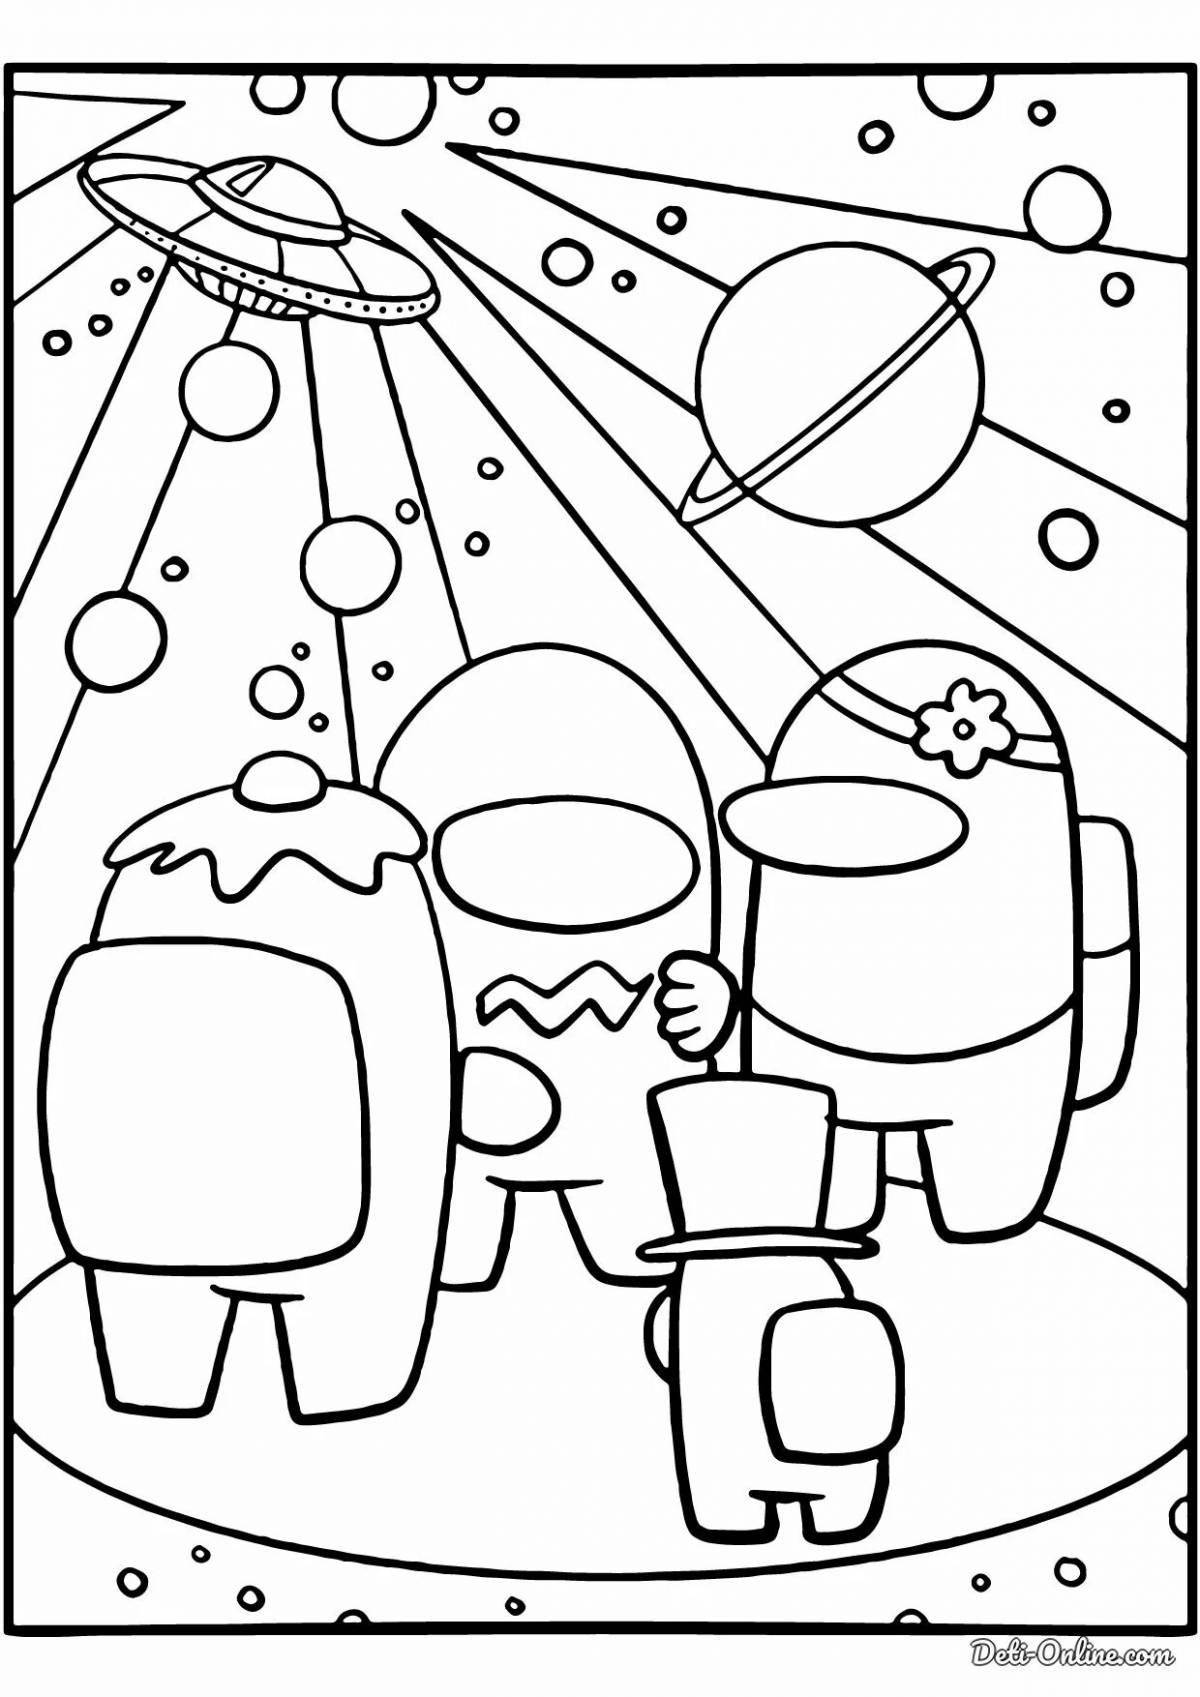 Cute amangas coloring book for kids